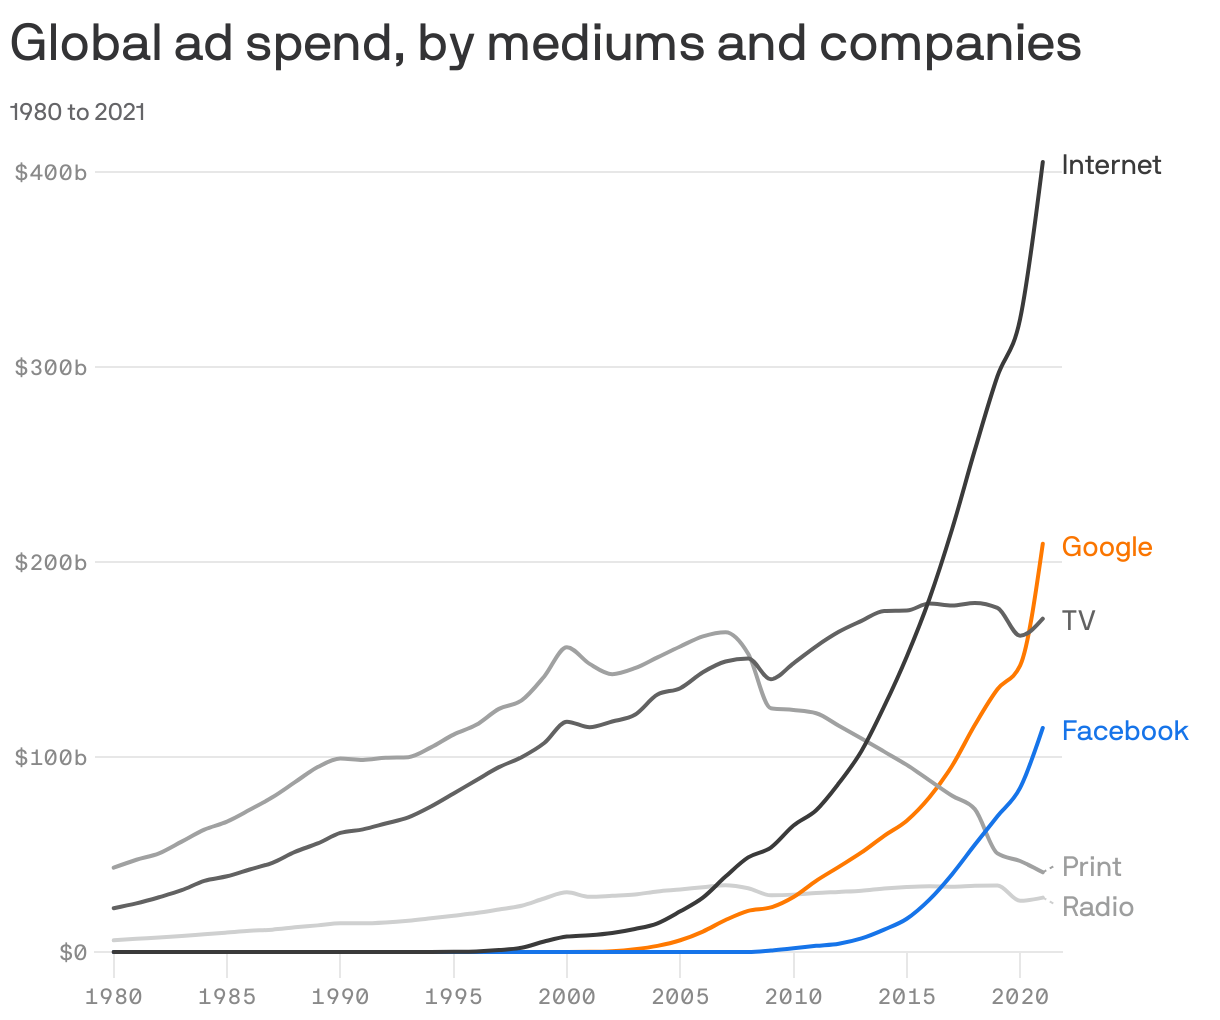 Global ad spend, by mediums and companies